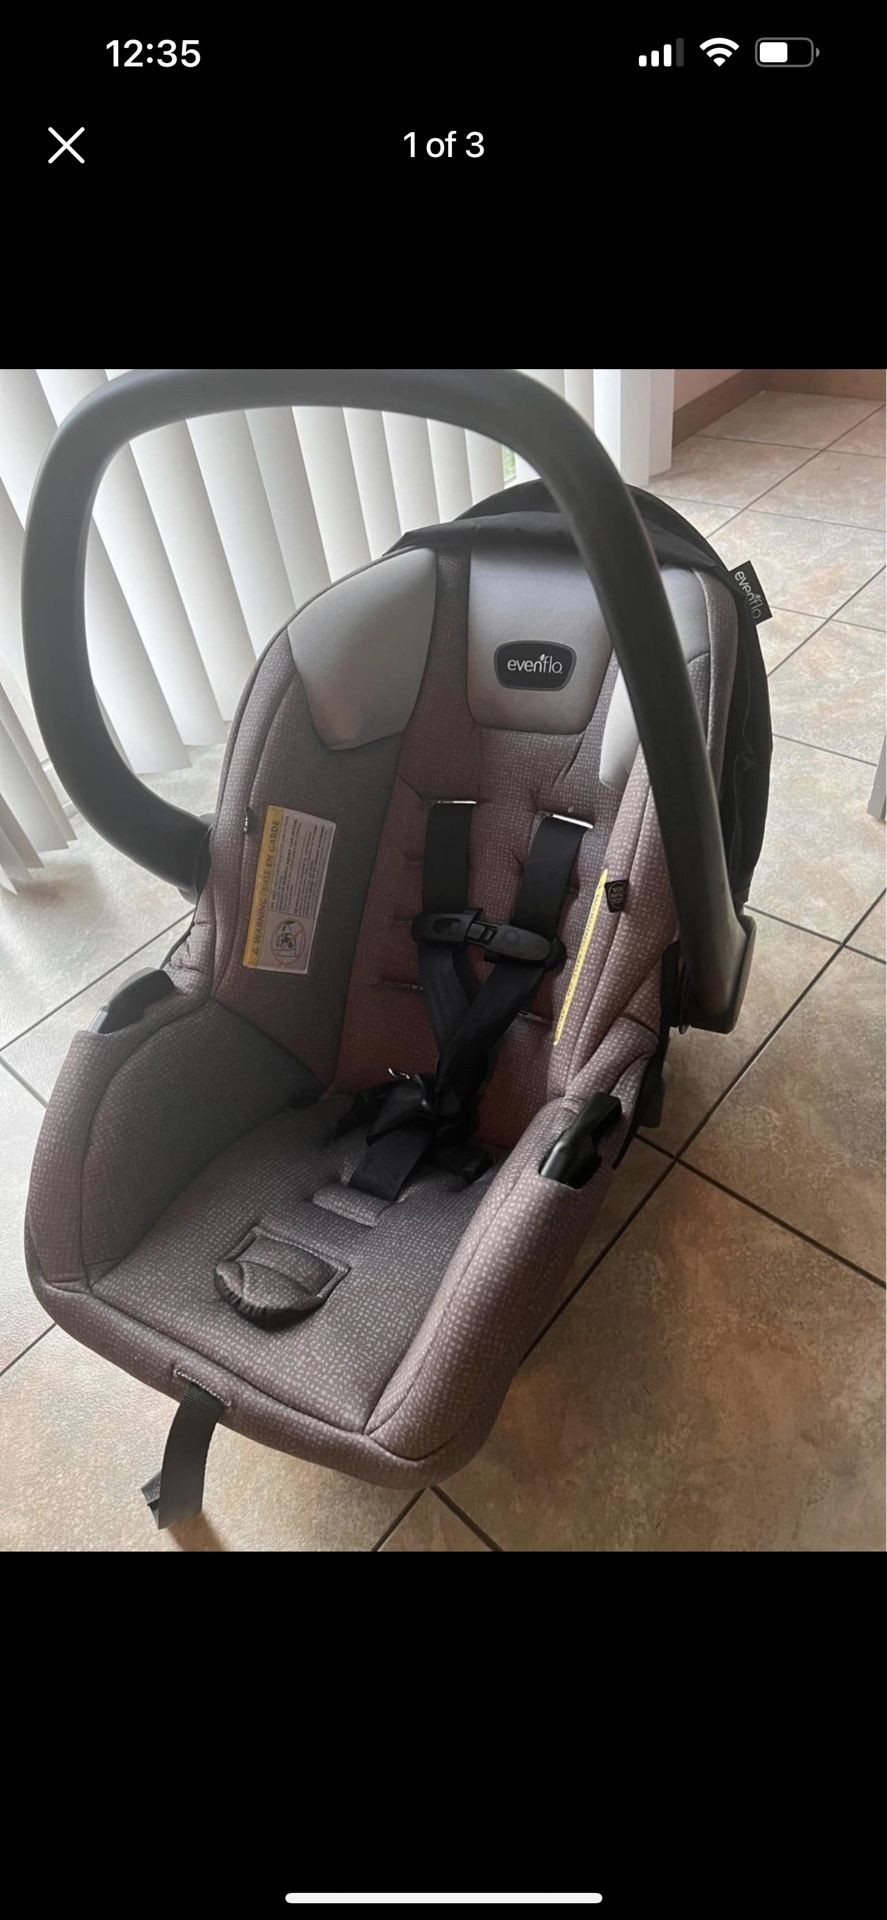 Evenflo Car Seat With Matching Stroller Attachment